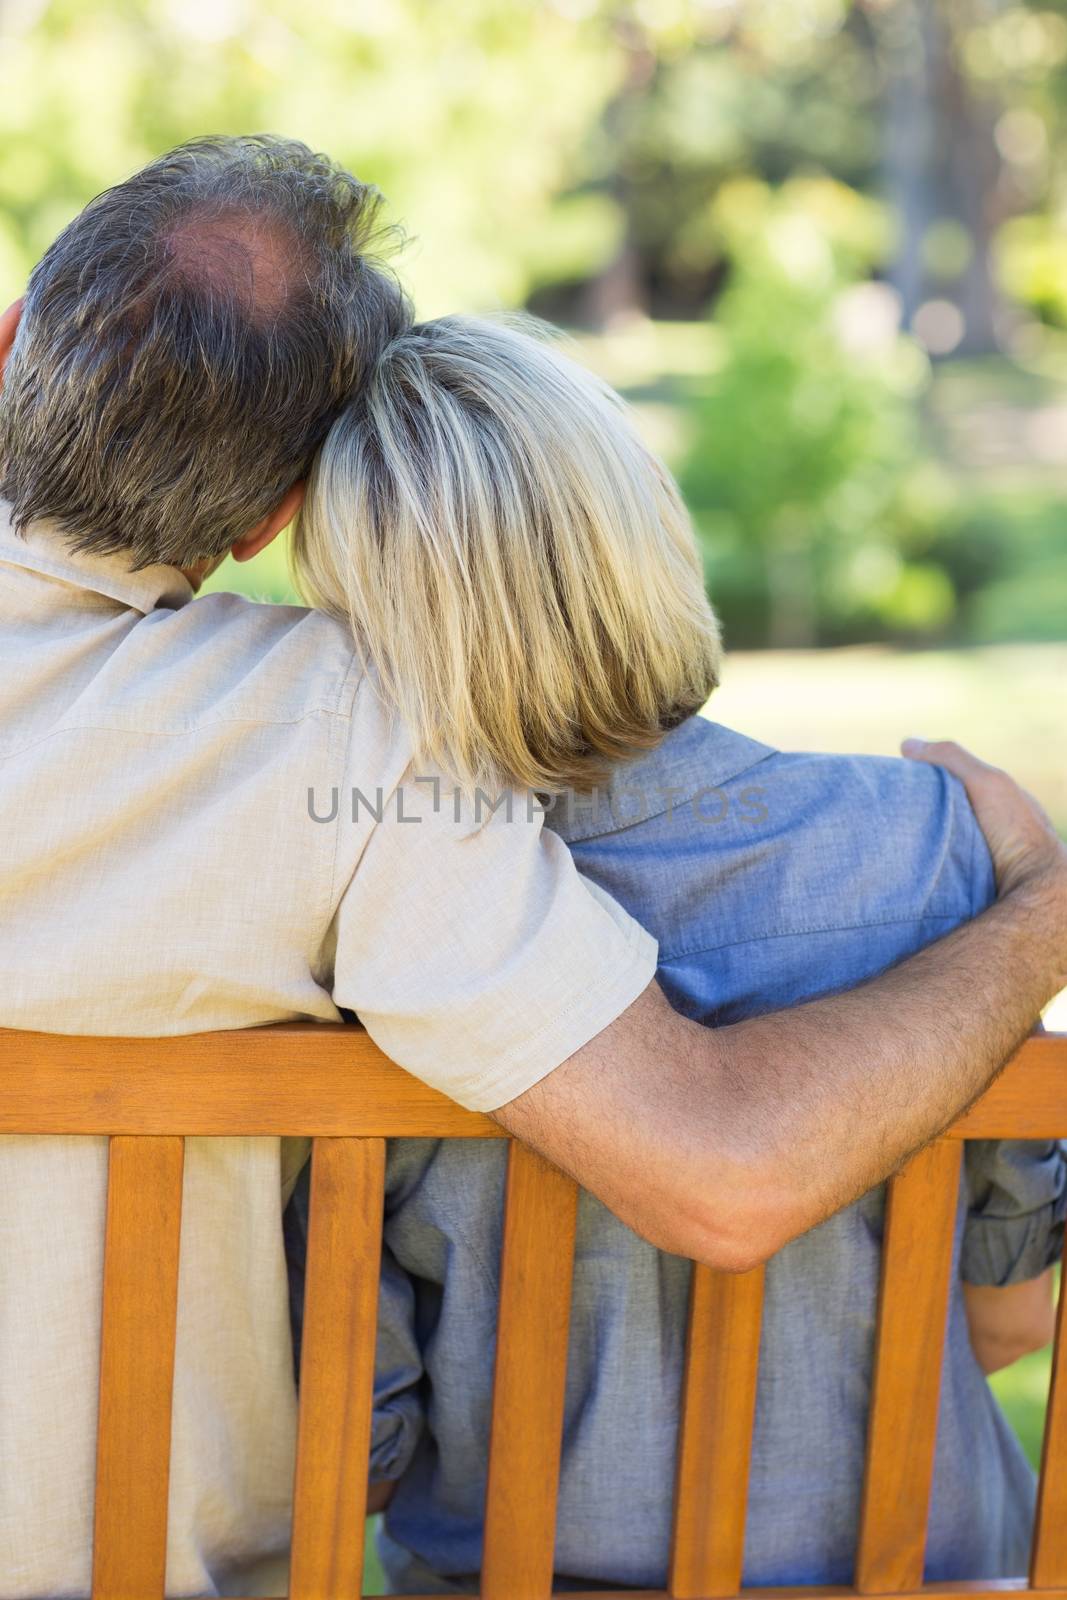 Couple relaxing on bench in park by Wavebreakmedia